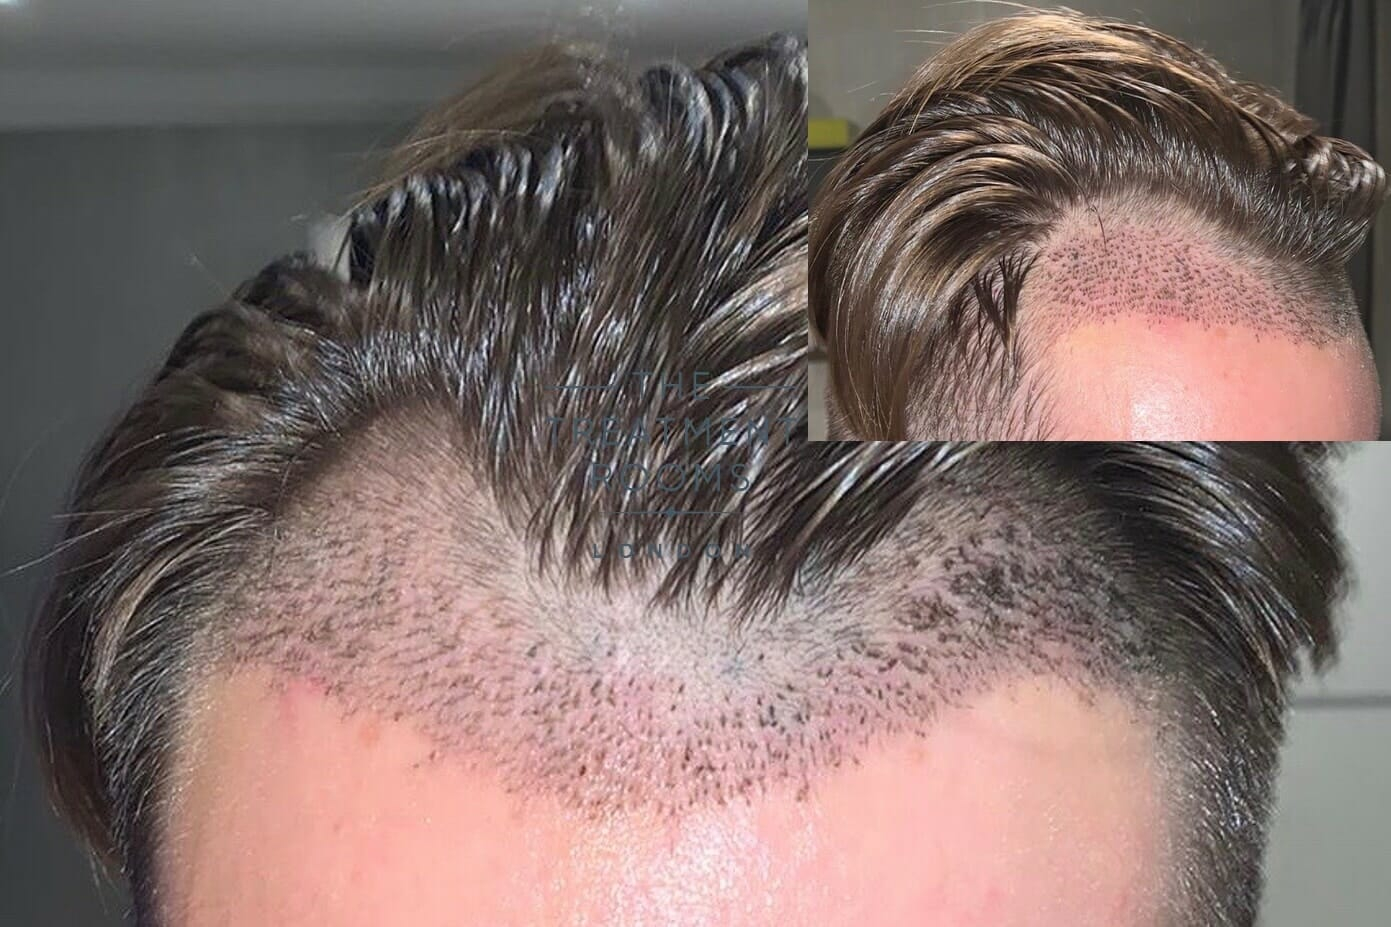 Scaps following a hairline transplant, working slighlty into the mid scalp after 7 days